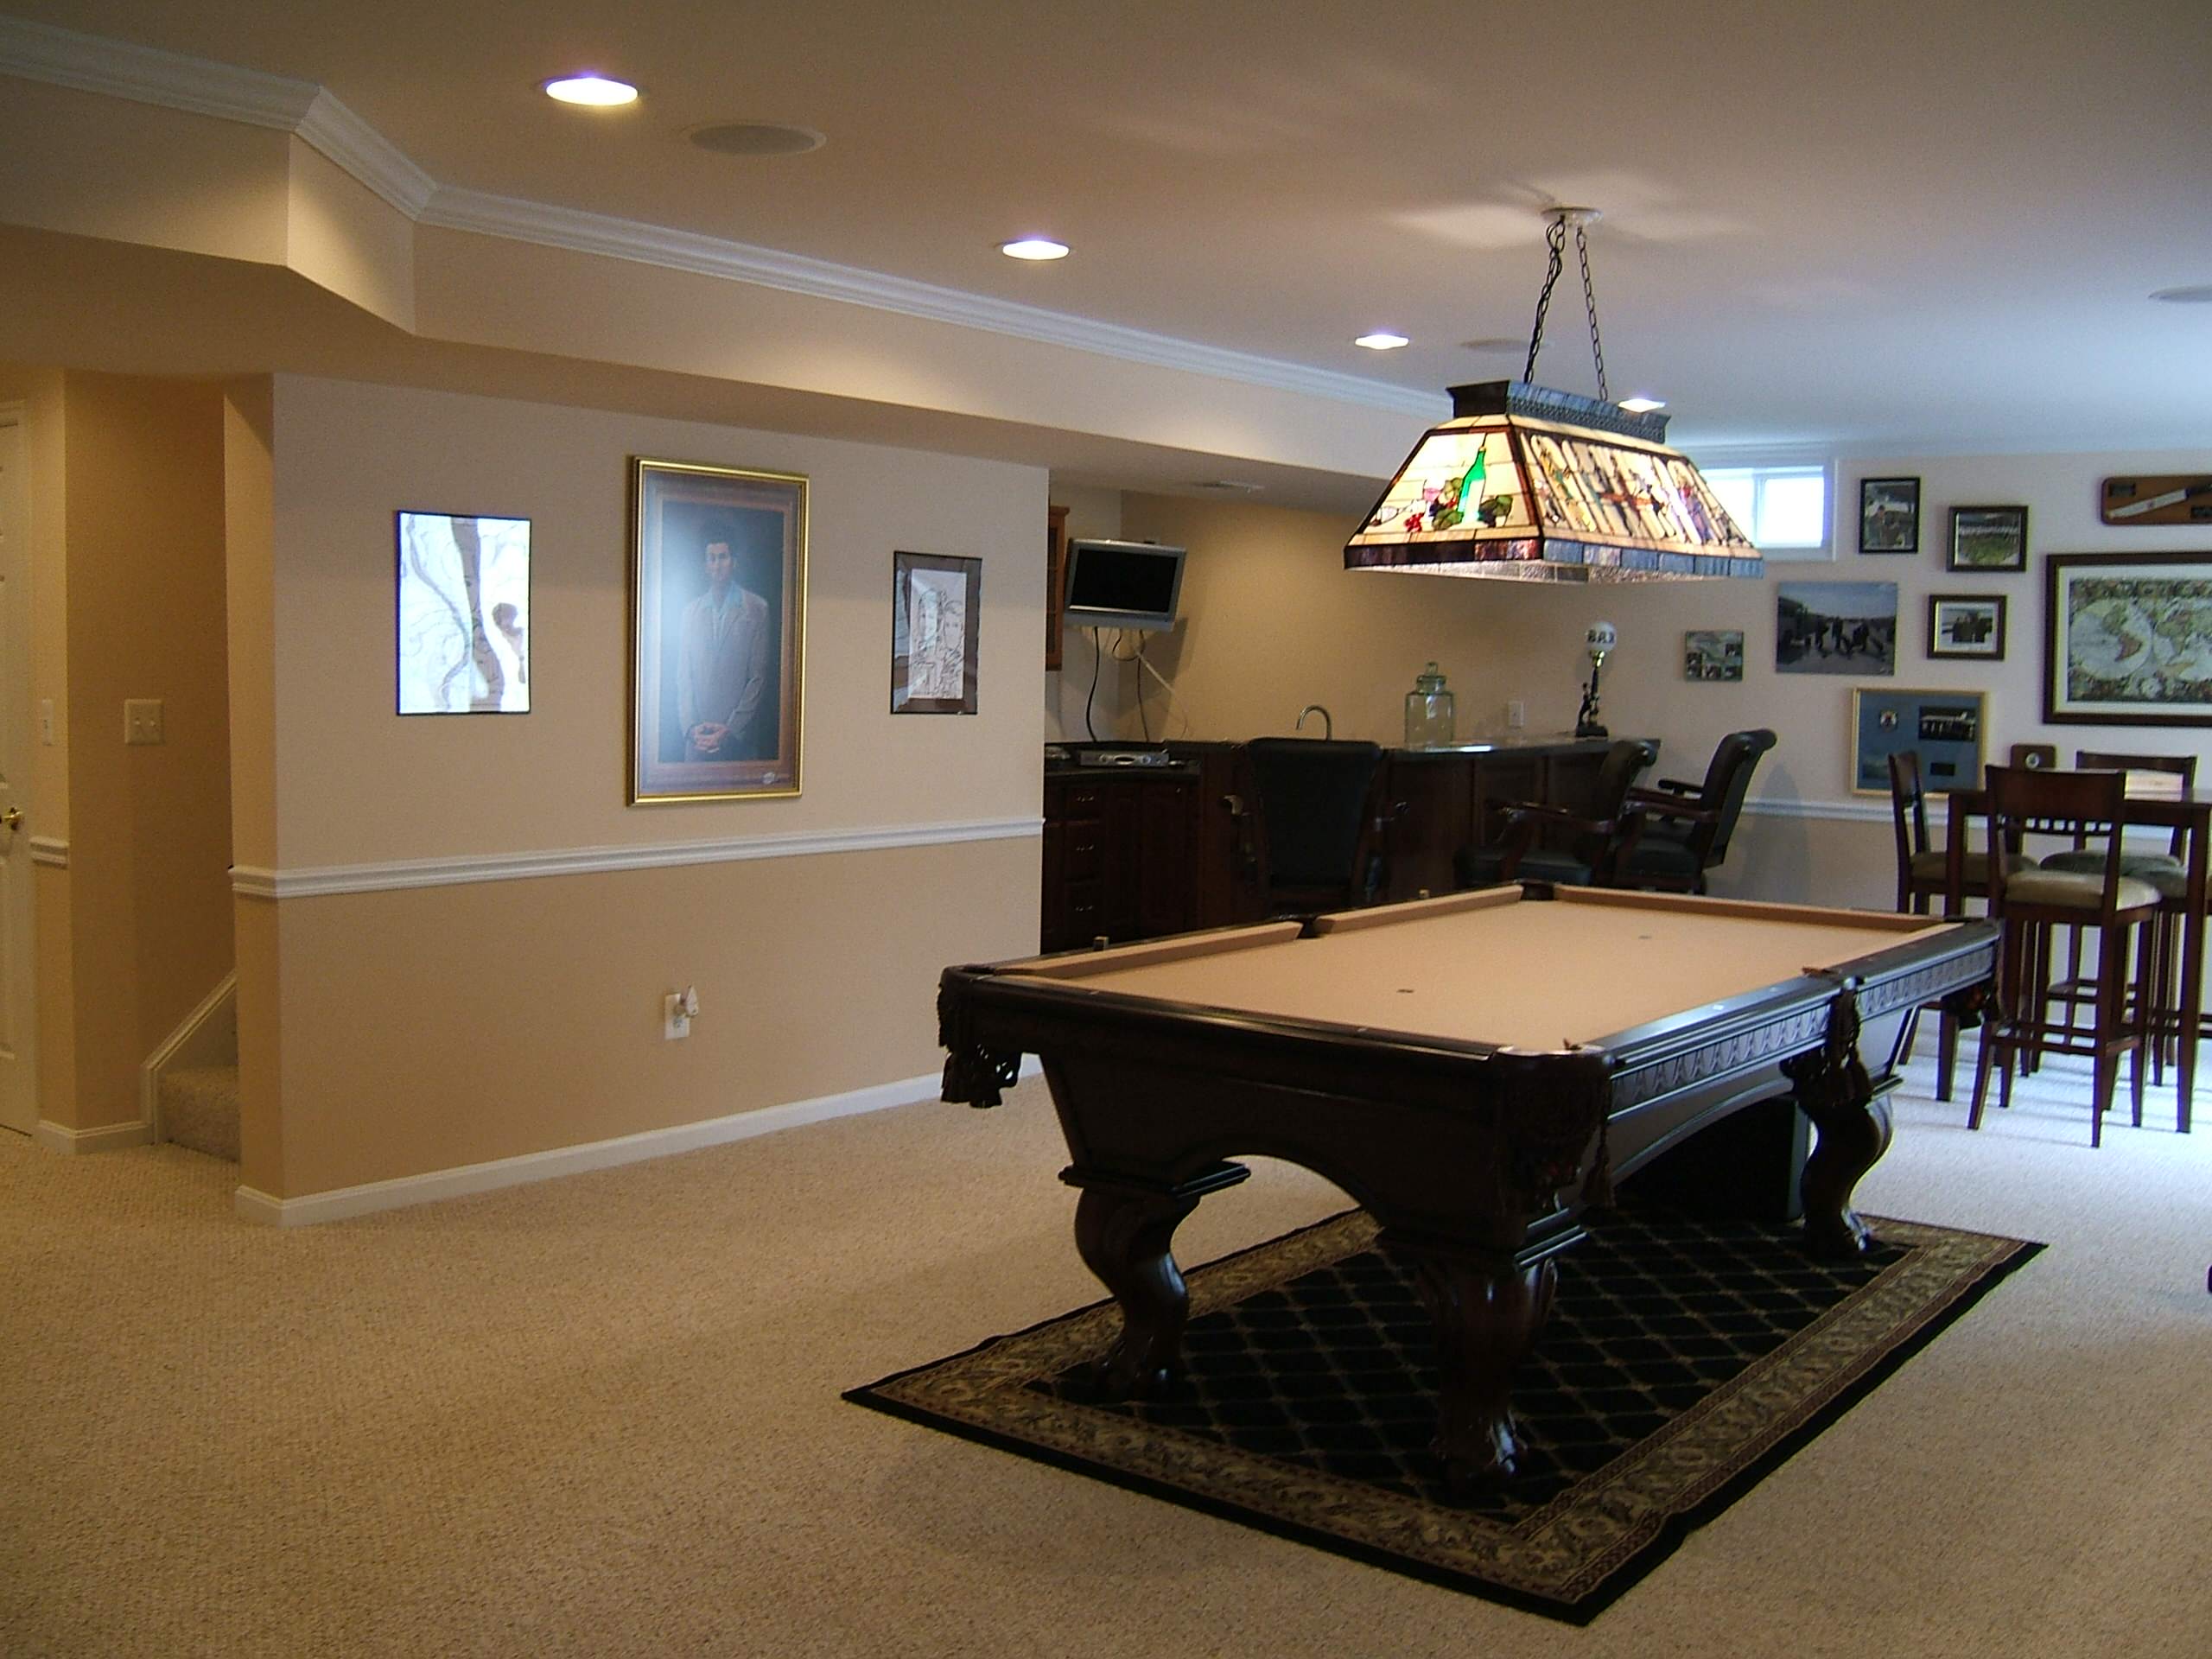 Rug Under Pool Table Houzz, Best Size Rug For Under 8 Foot Pool Table